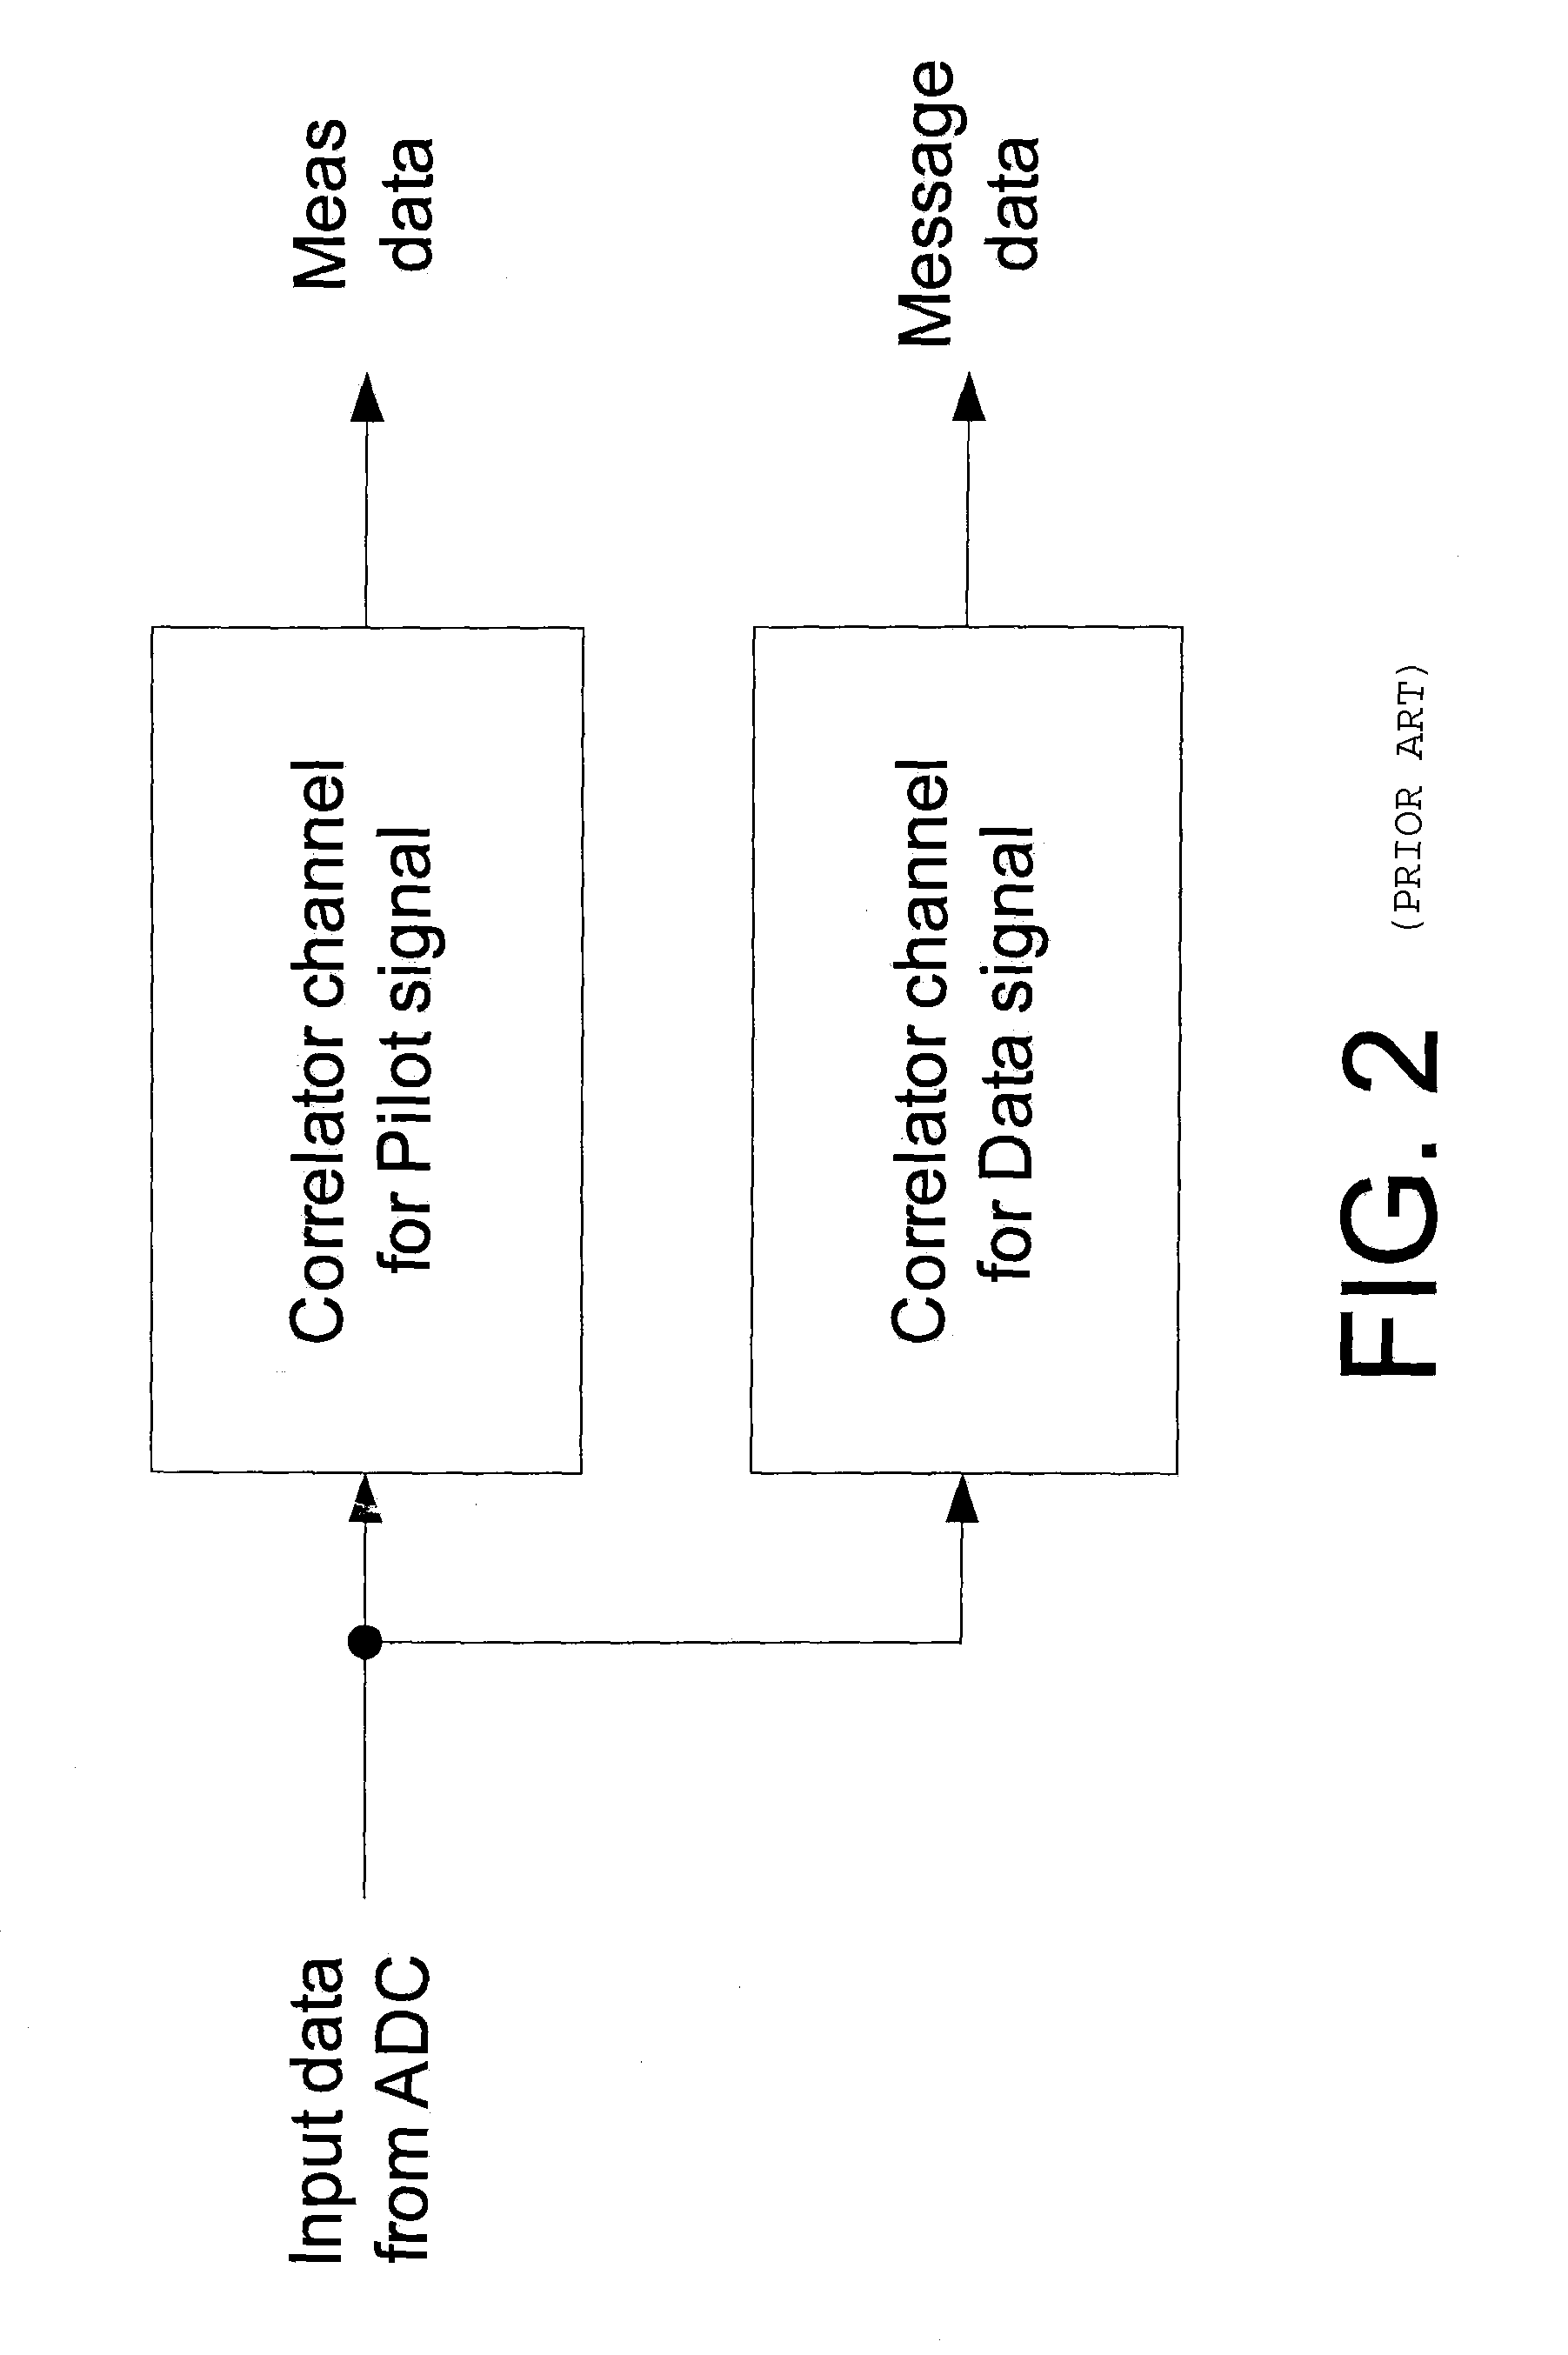 System and method for providing optimized receiver architectures for combined pilot and data signal tracking